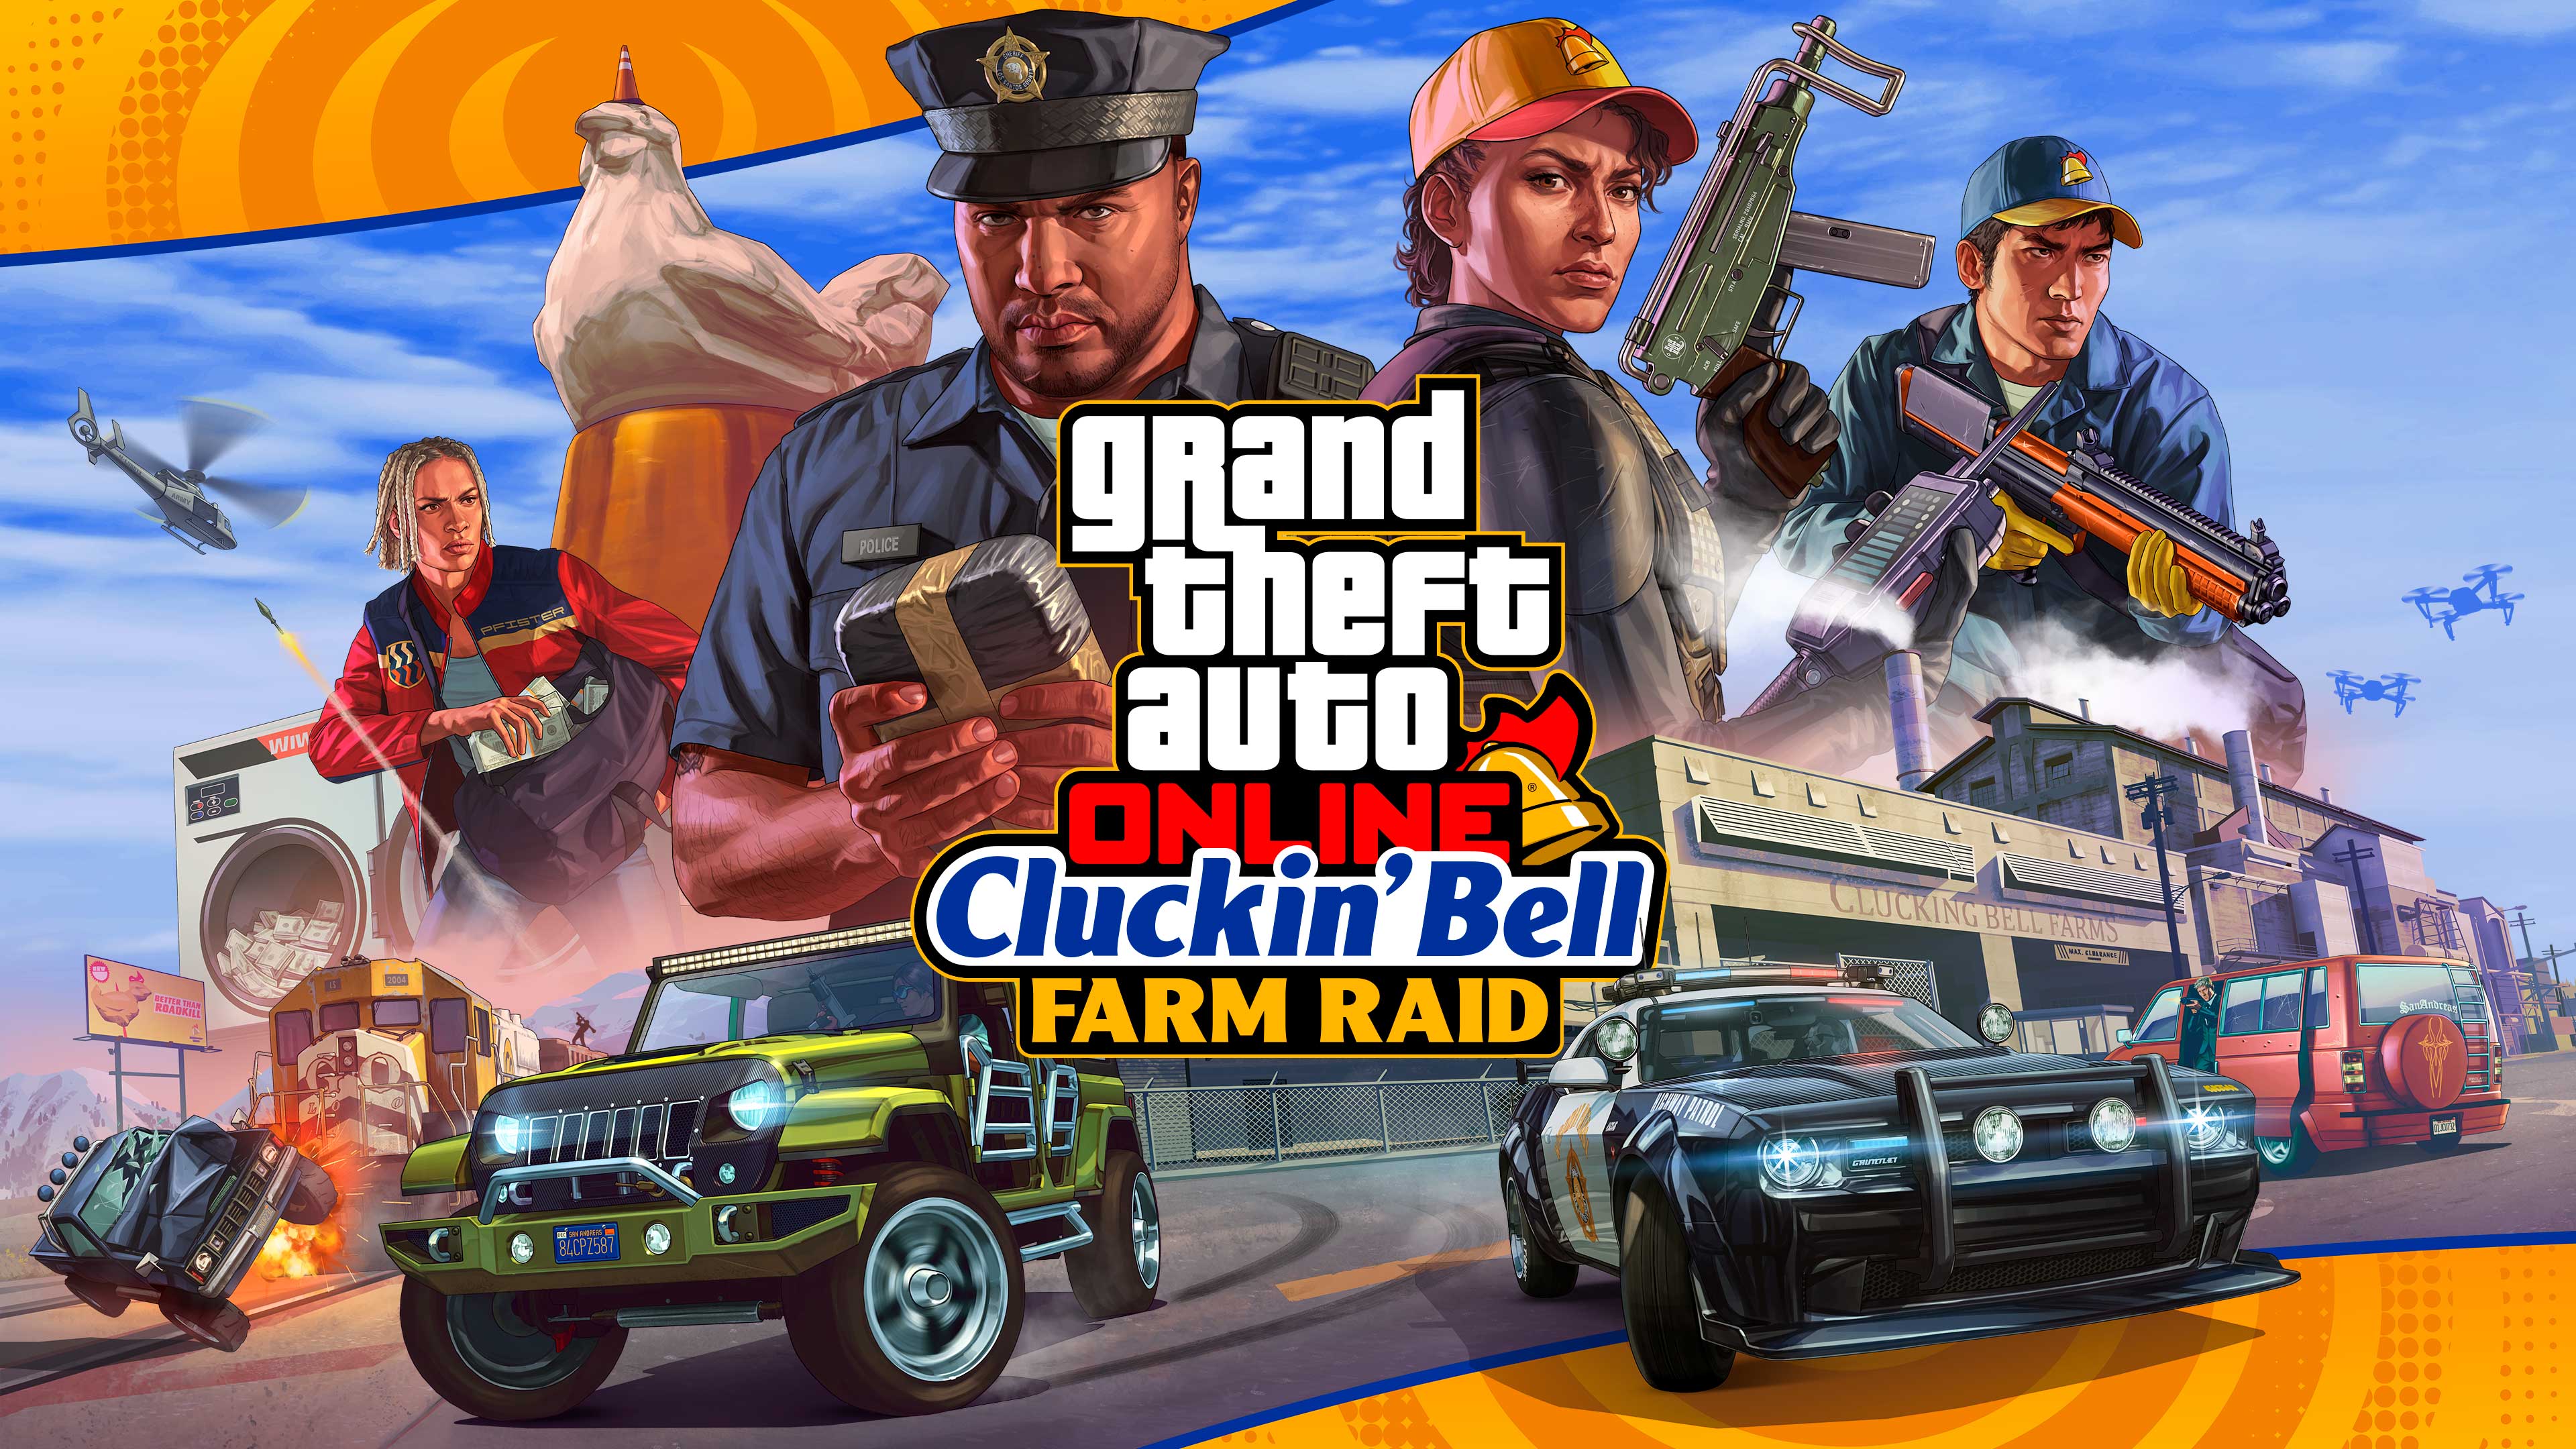 Players Gear Up for High-Stakes Heist at Cluckin’ Bell Farm in GTA Online